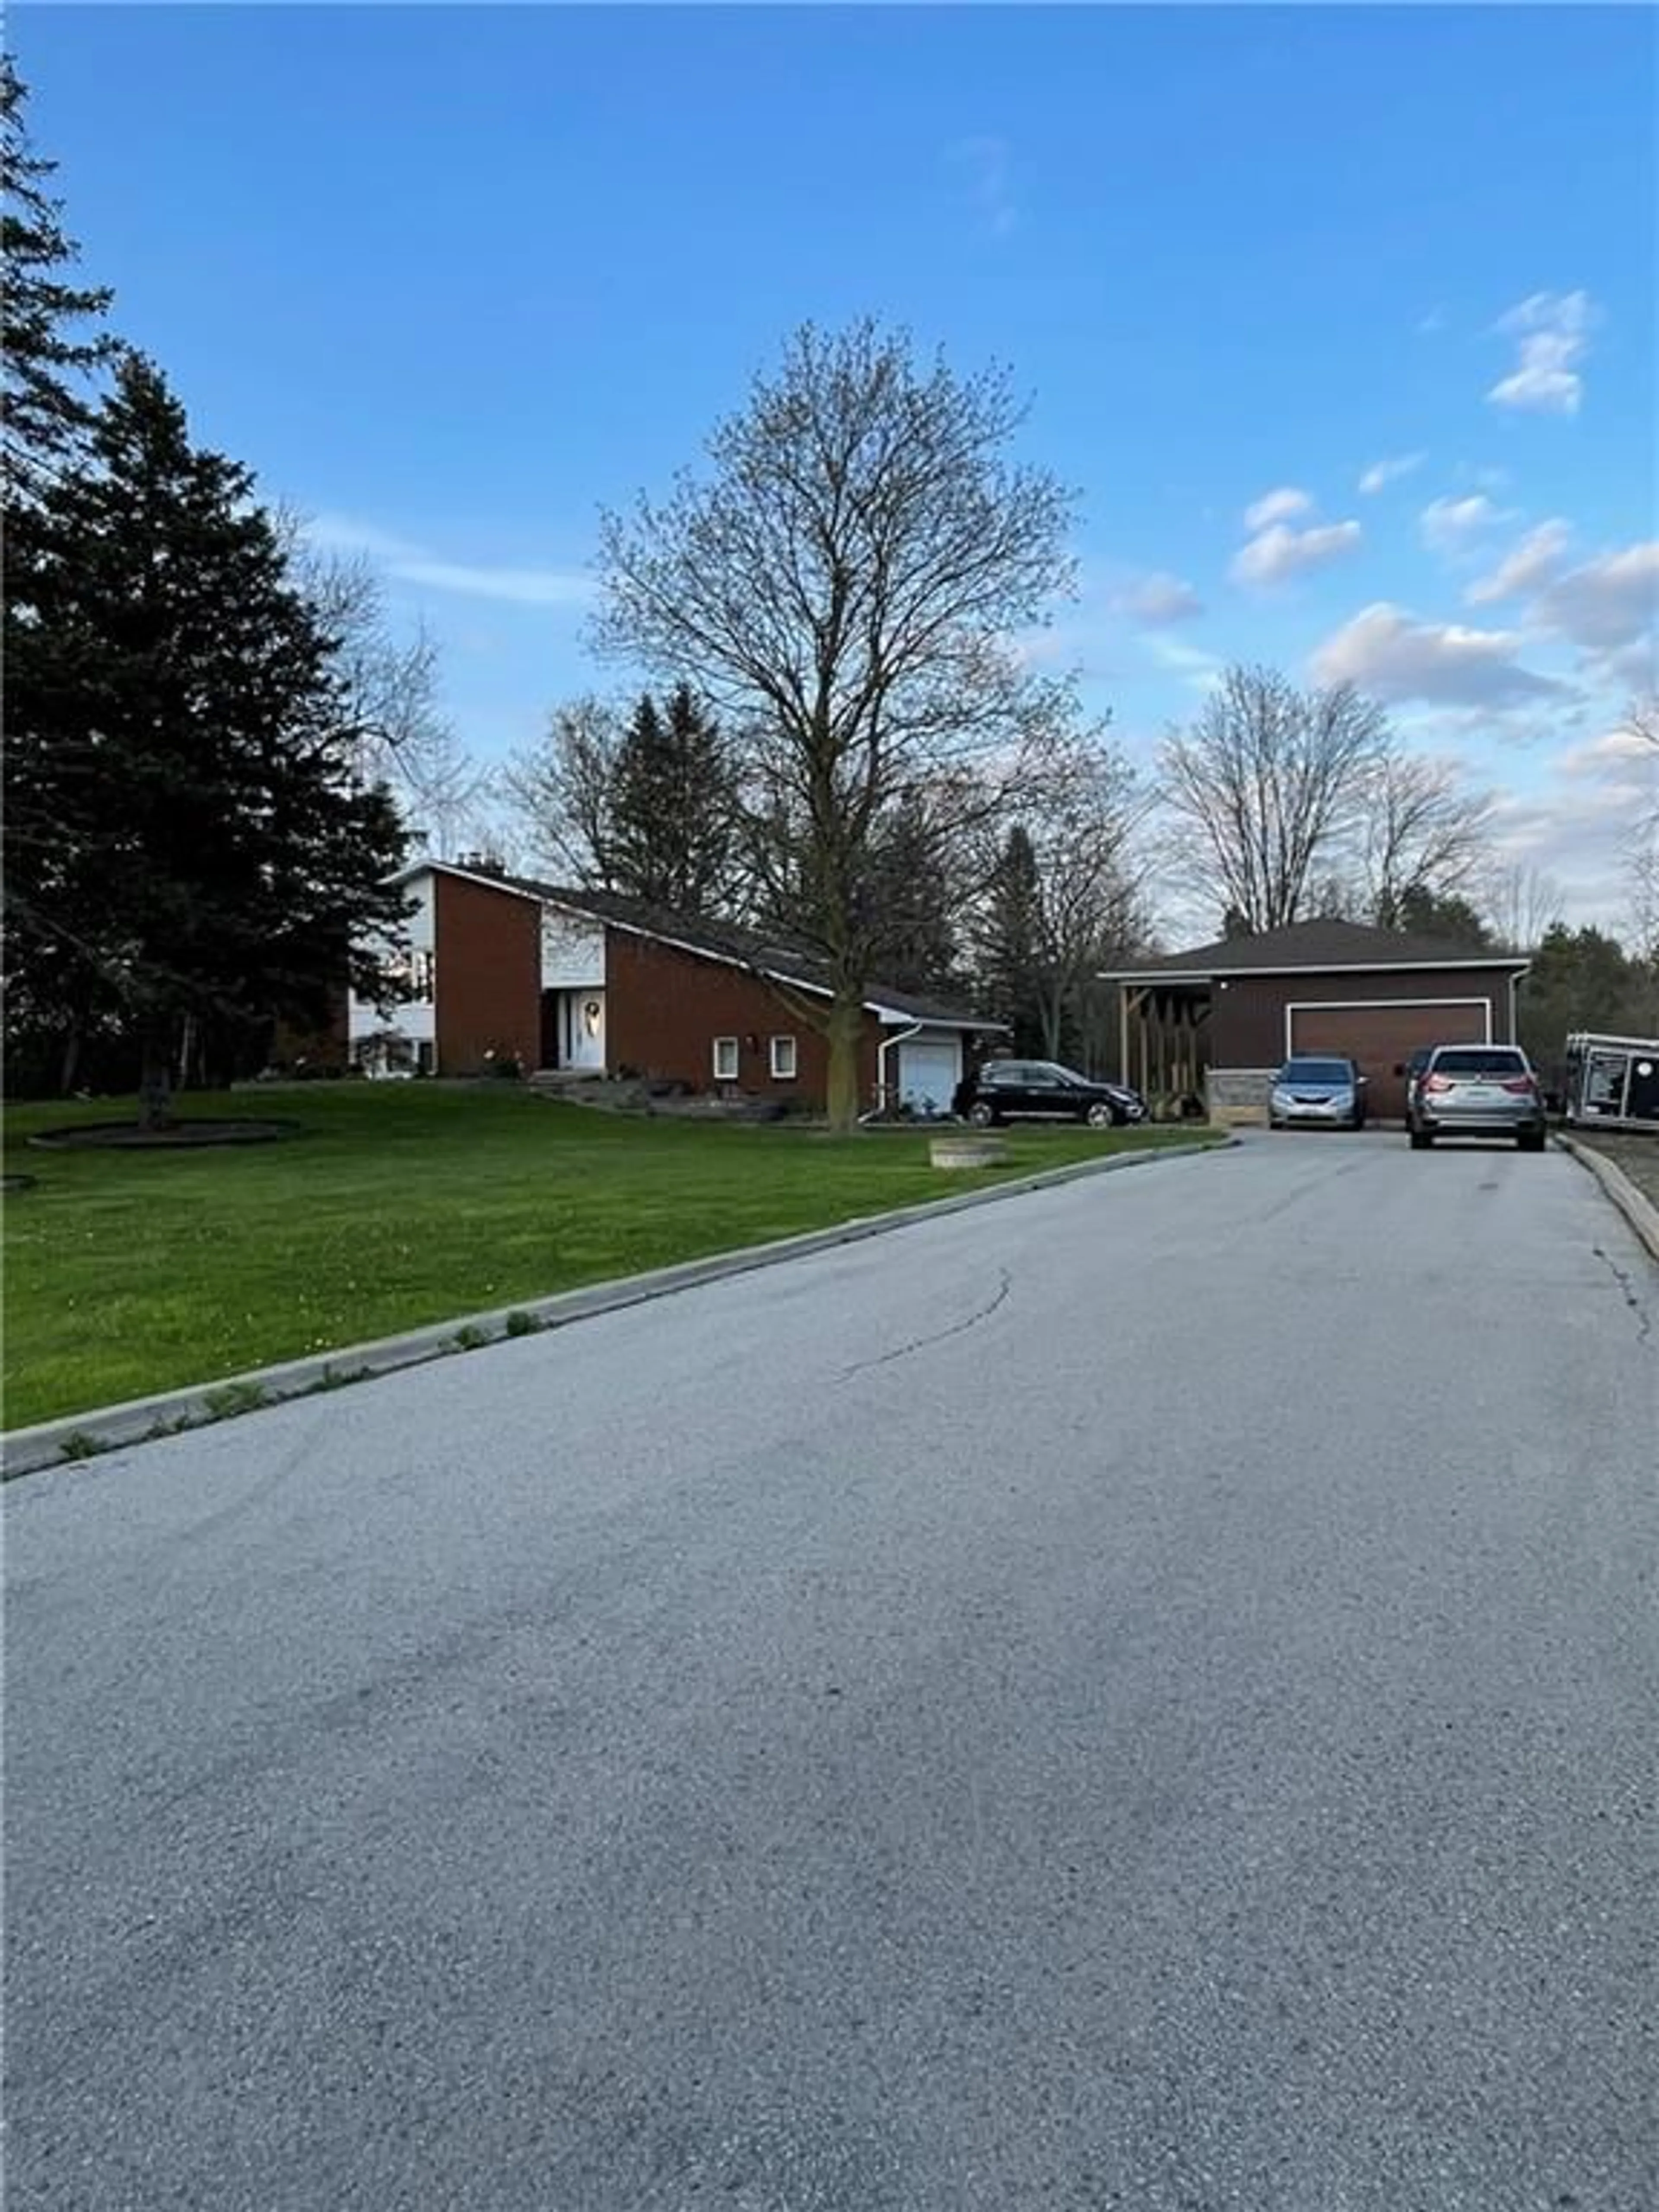 Frontside or backside of a home for 1311 FIDDLERS GREEN Rd, Ancaster Ontario L9G 3L1